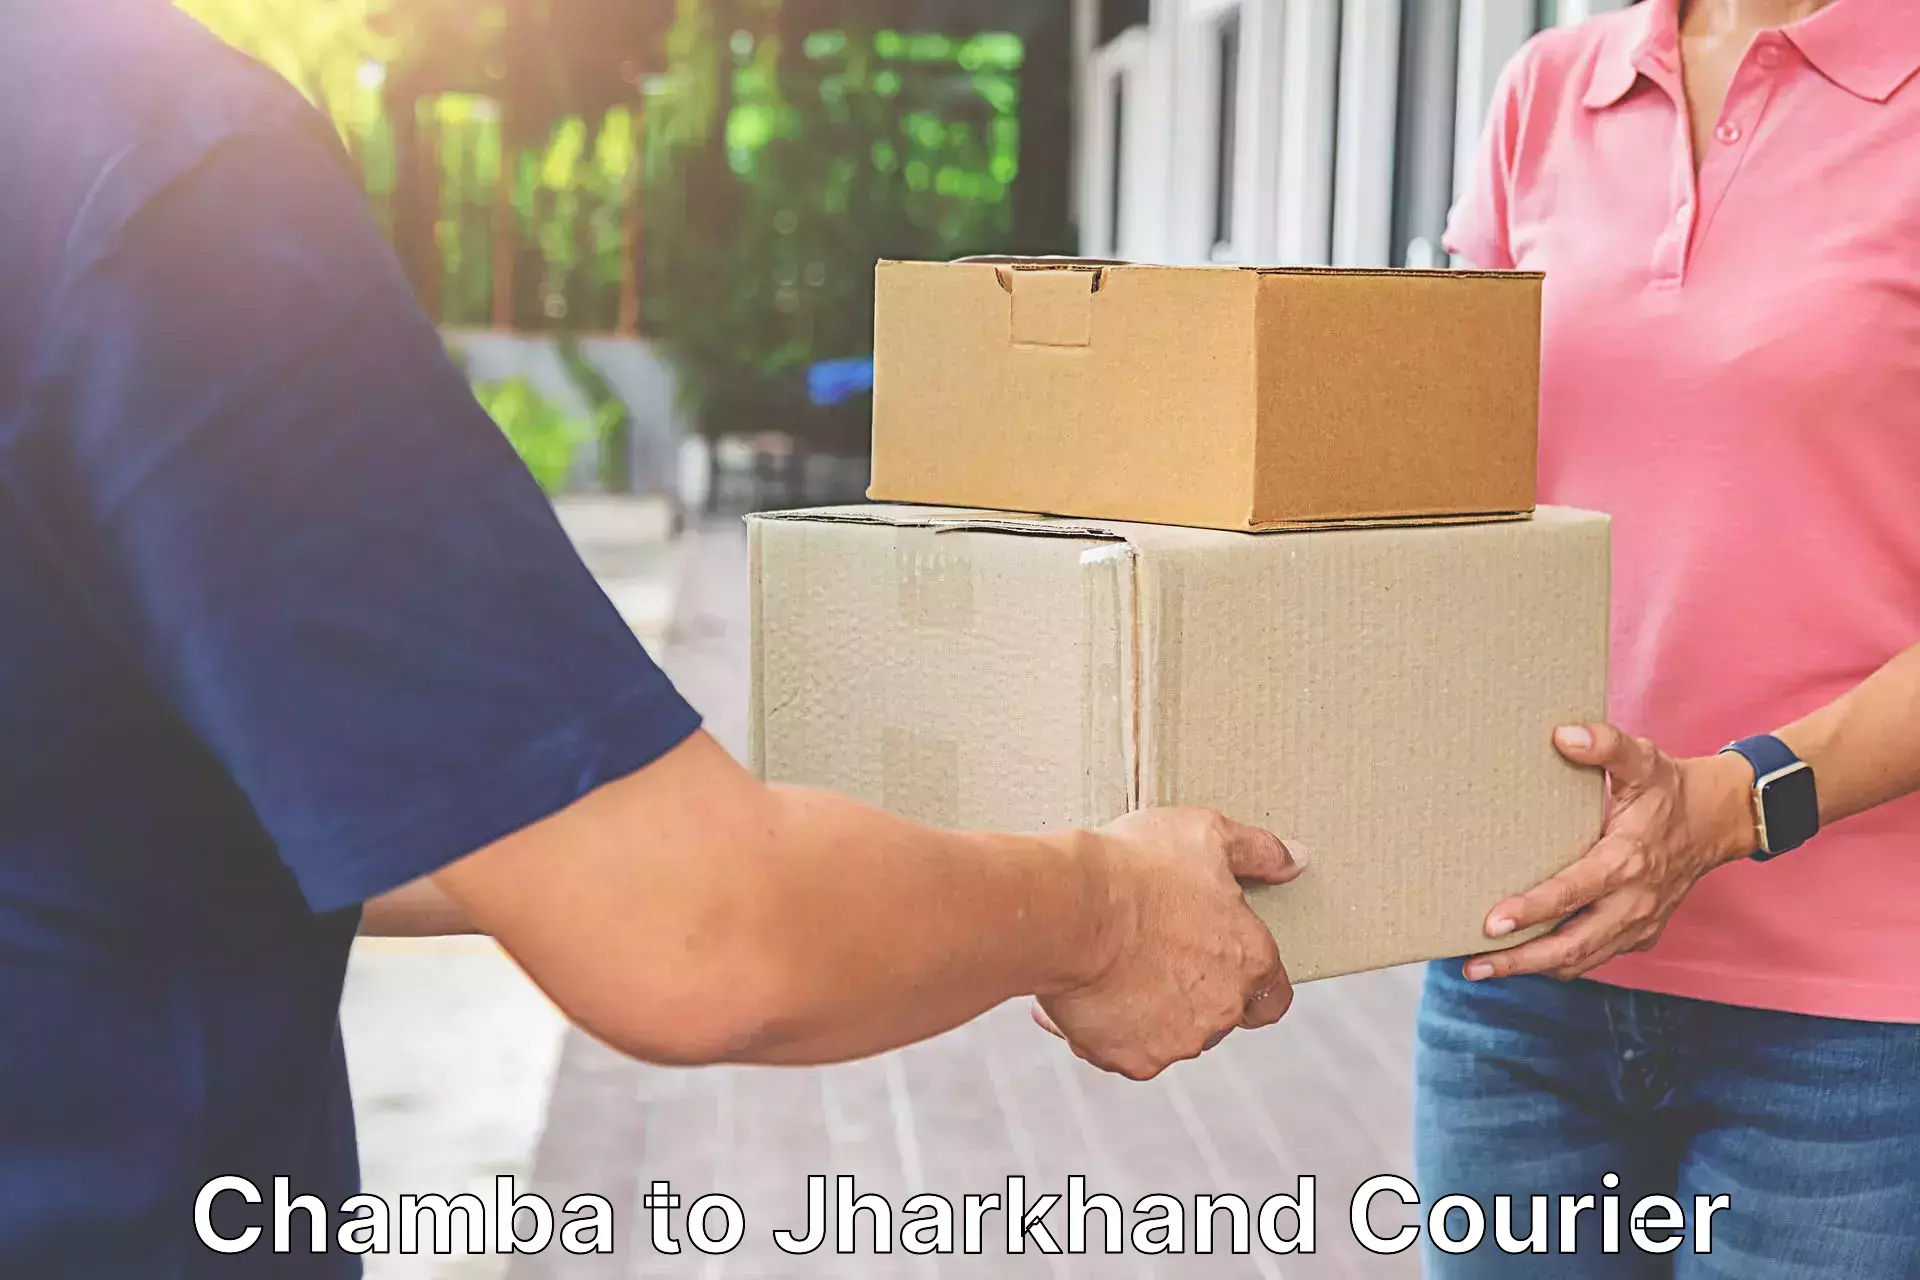 Professional courier services Chamba to Chandil